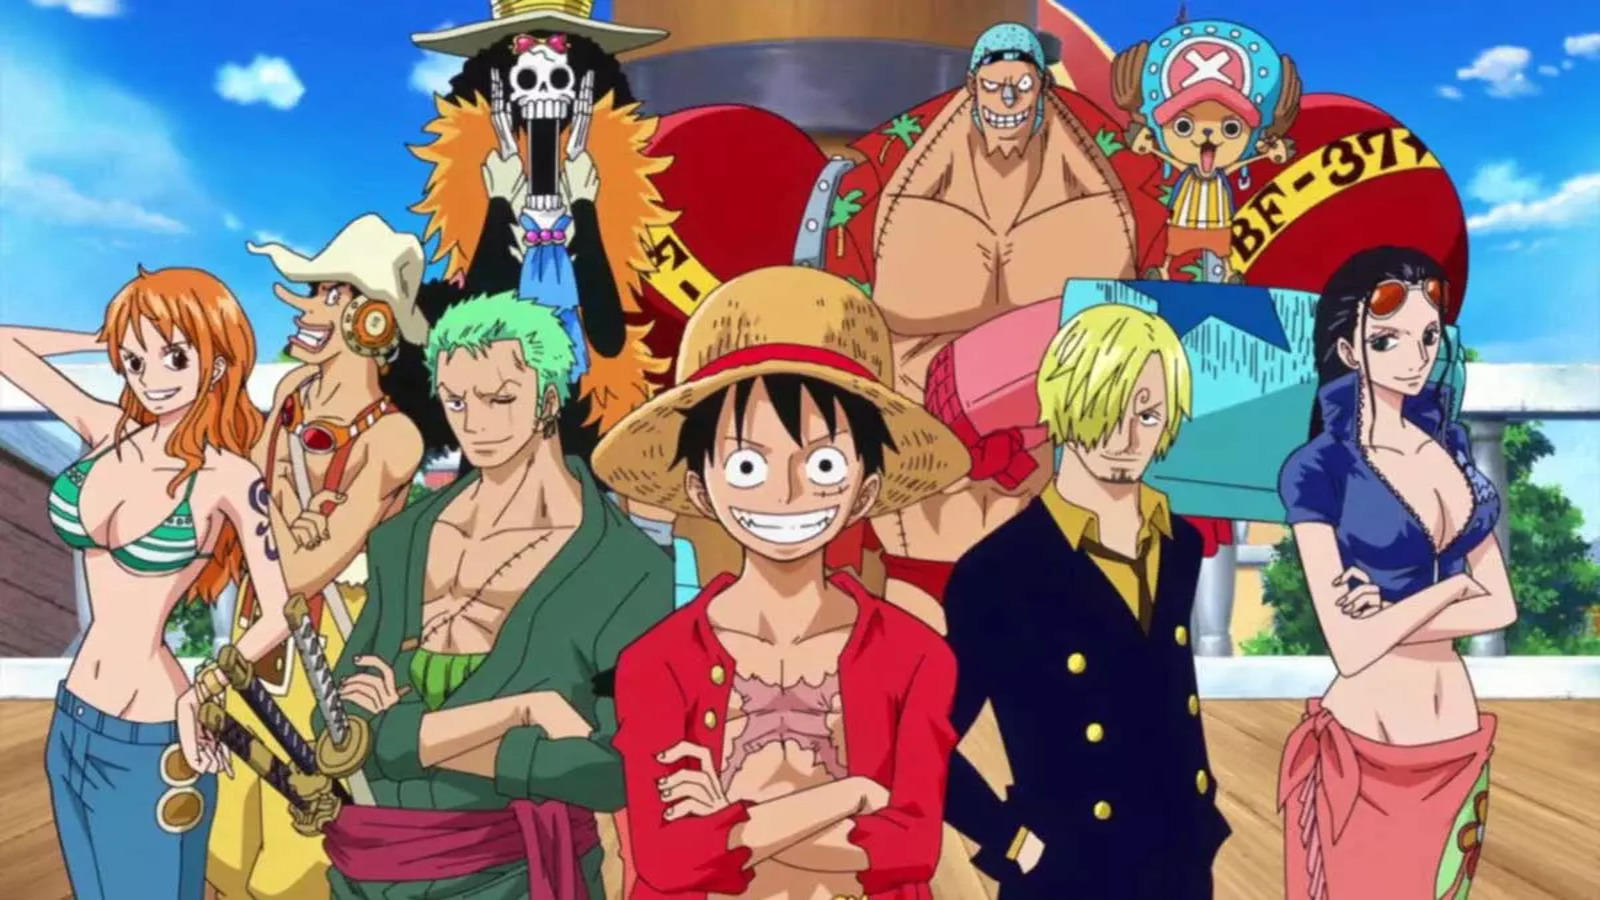 Epic Adventure Awaits: Fortnite x One Piece Collaboration Unveiled